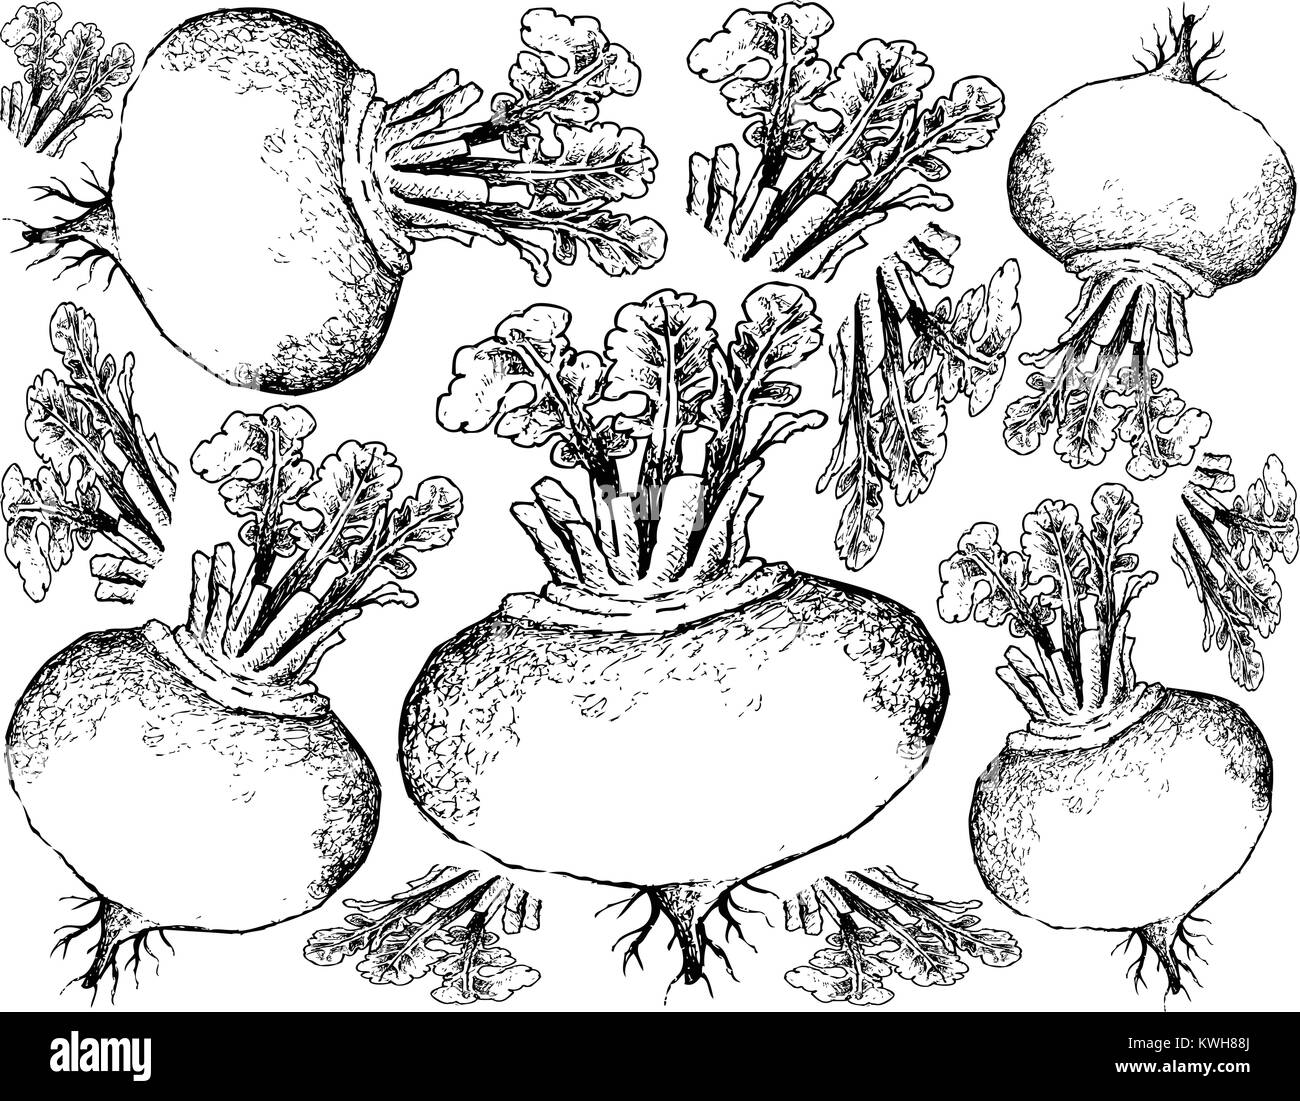 Root and Tuberous Vegetables, Illustration Hand Drawn Sketch of Fresh Purple Turnip or Brassica Rapa Plant with Leaves Isolated on White Background Stock Vector